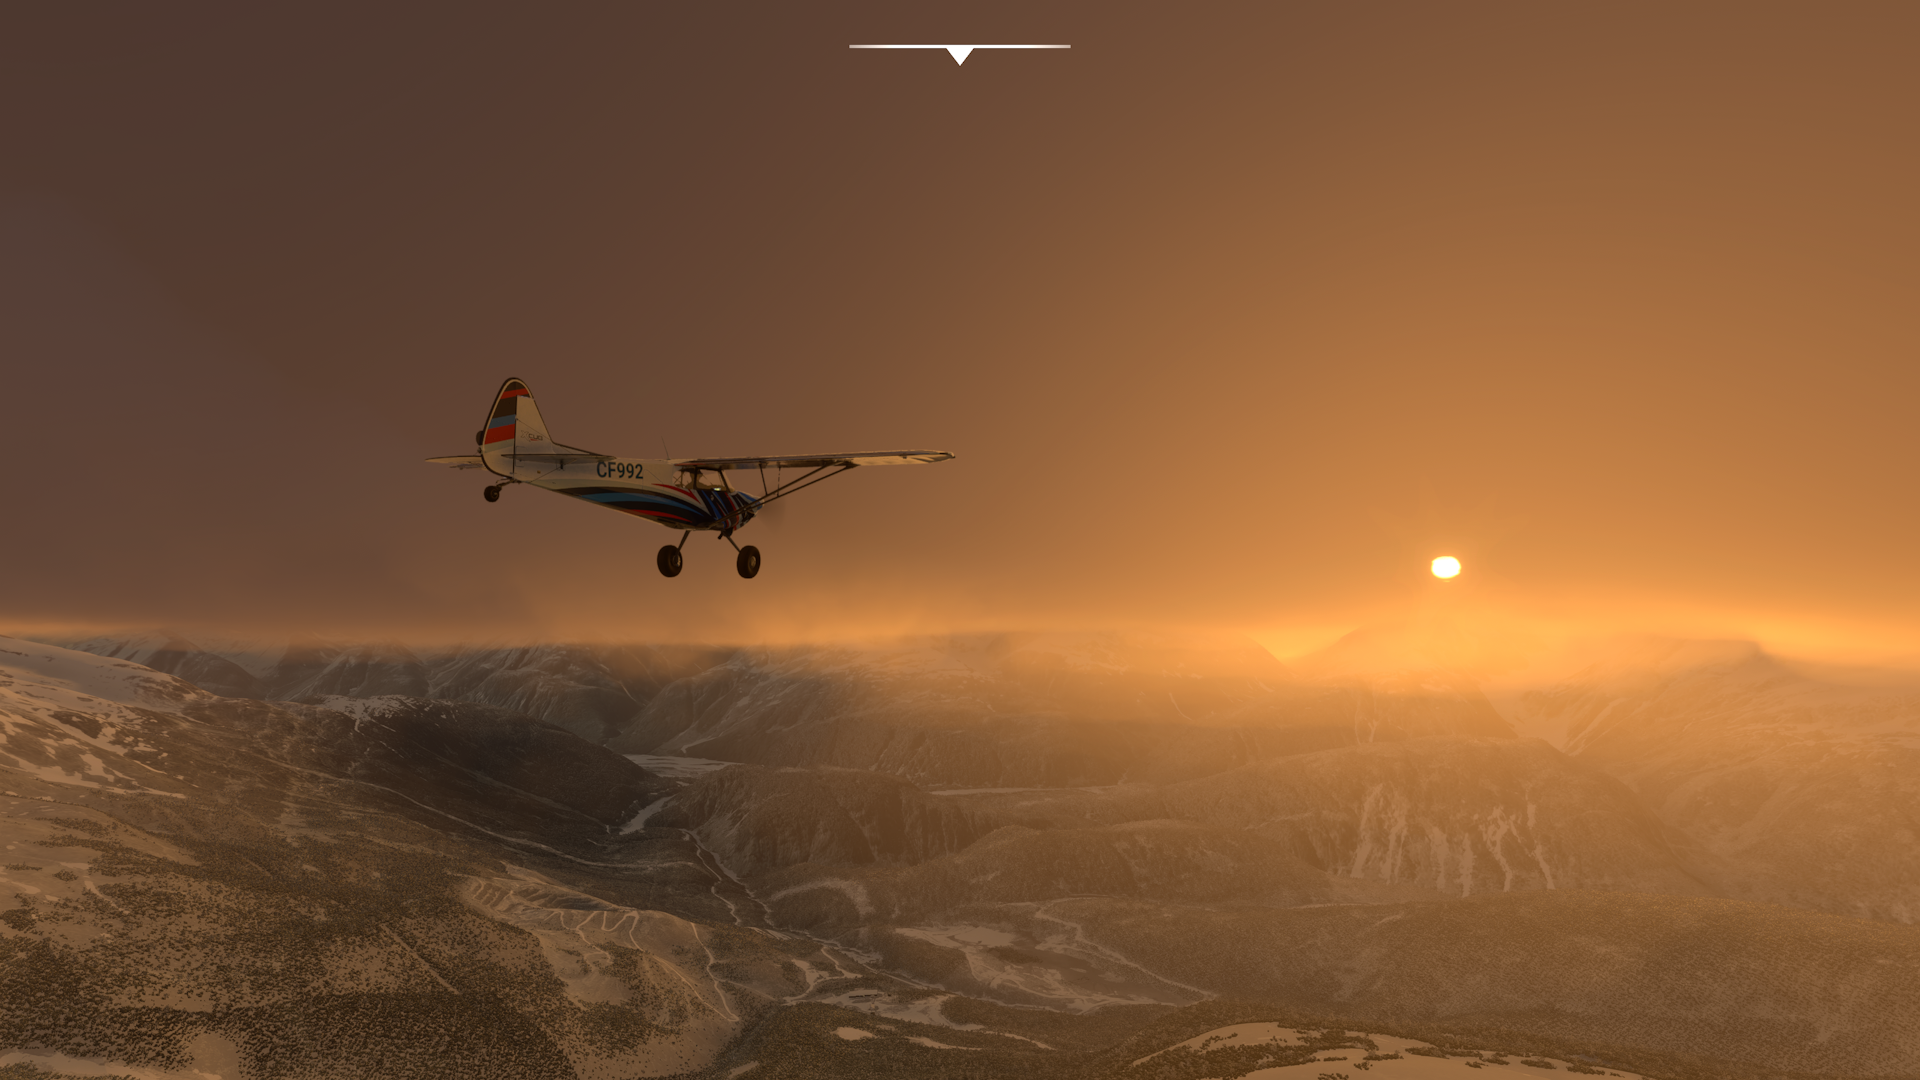 Flight over the Rockies in Bristish Columbia in a freezing cold sunset | Microsoft Flight Simulator